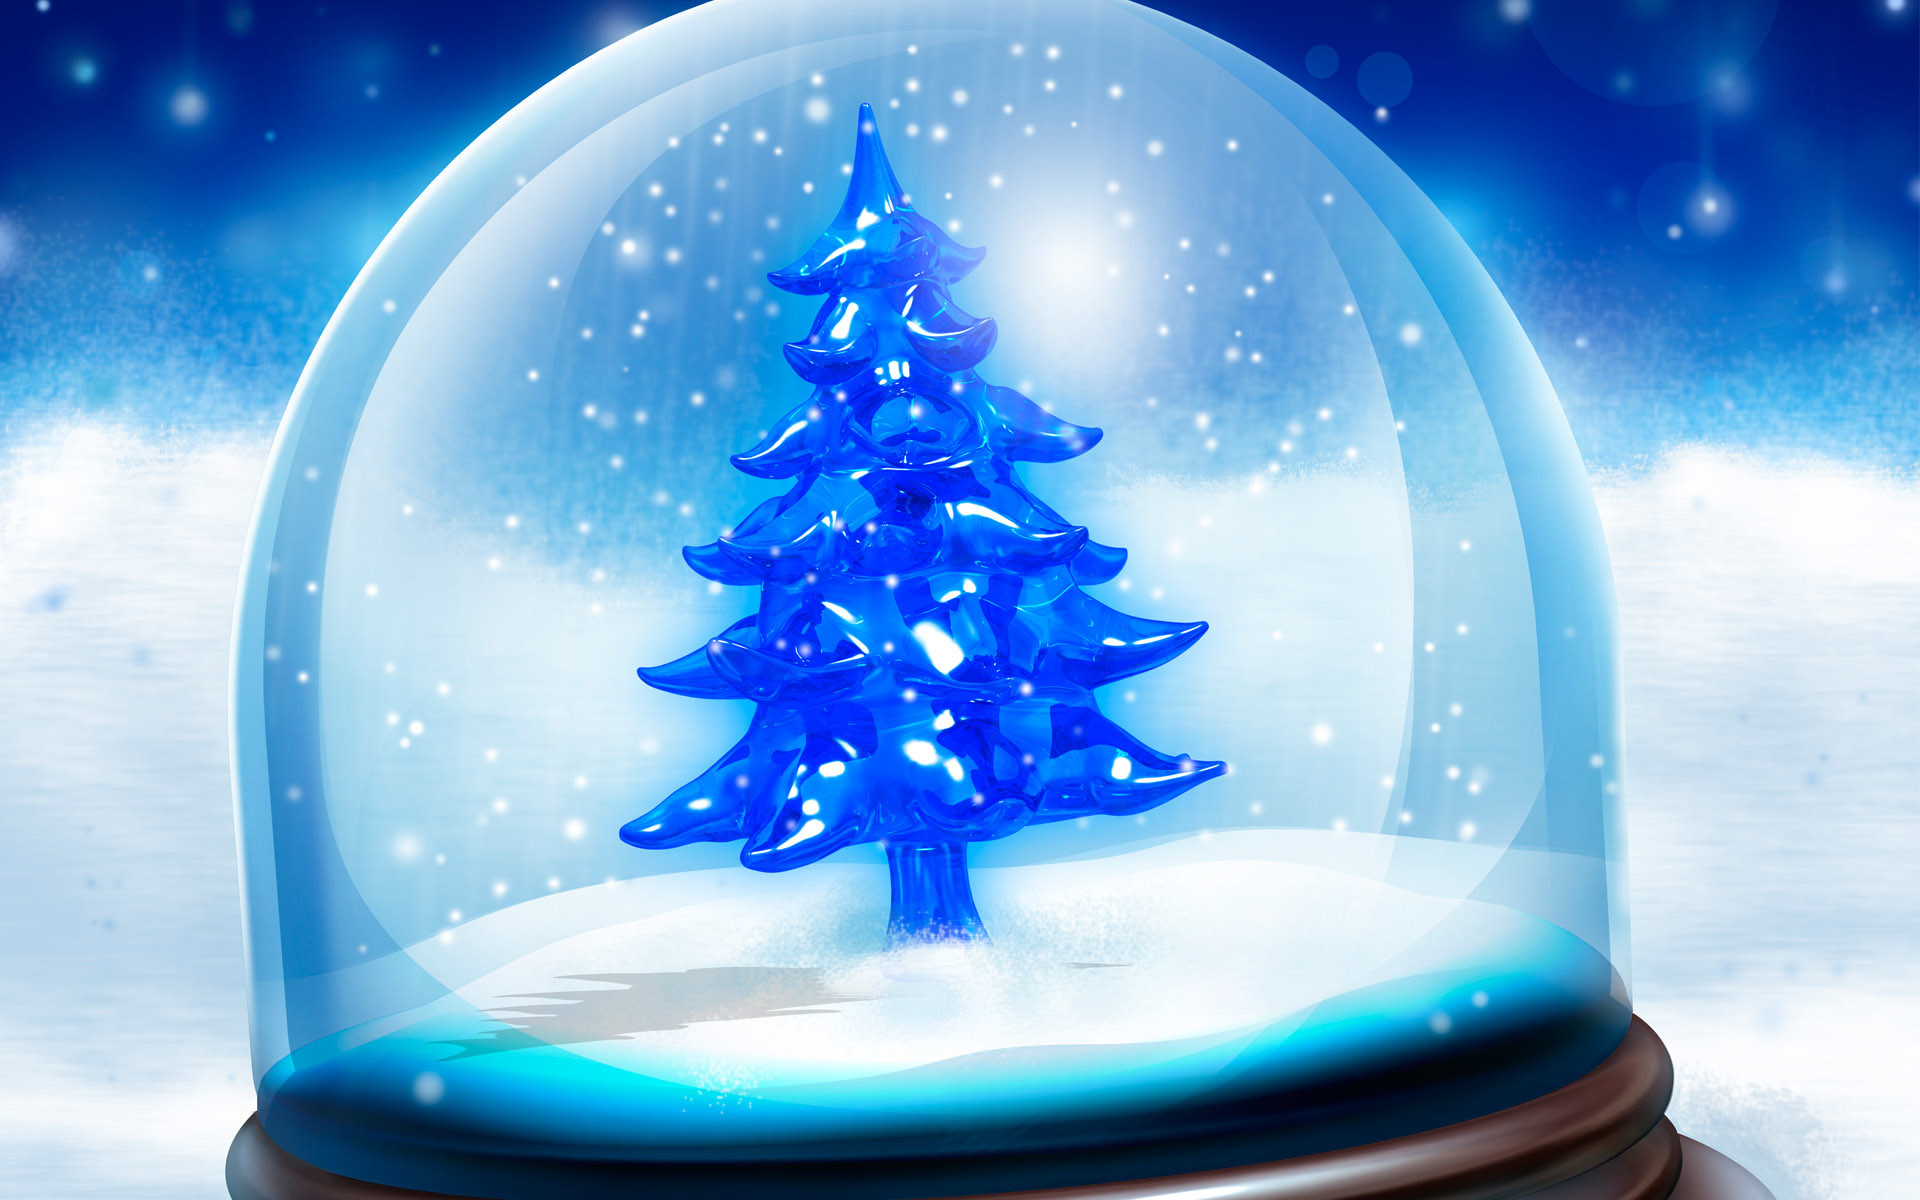 3d Christmas Tree Wallpapers | Free 3d Christmas Tree Backgrounds .